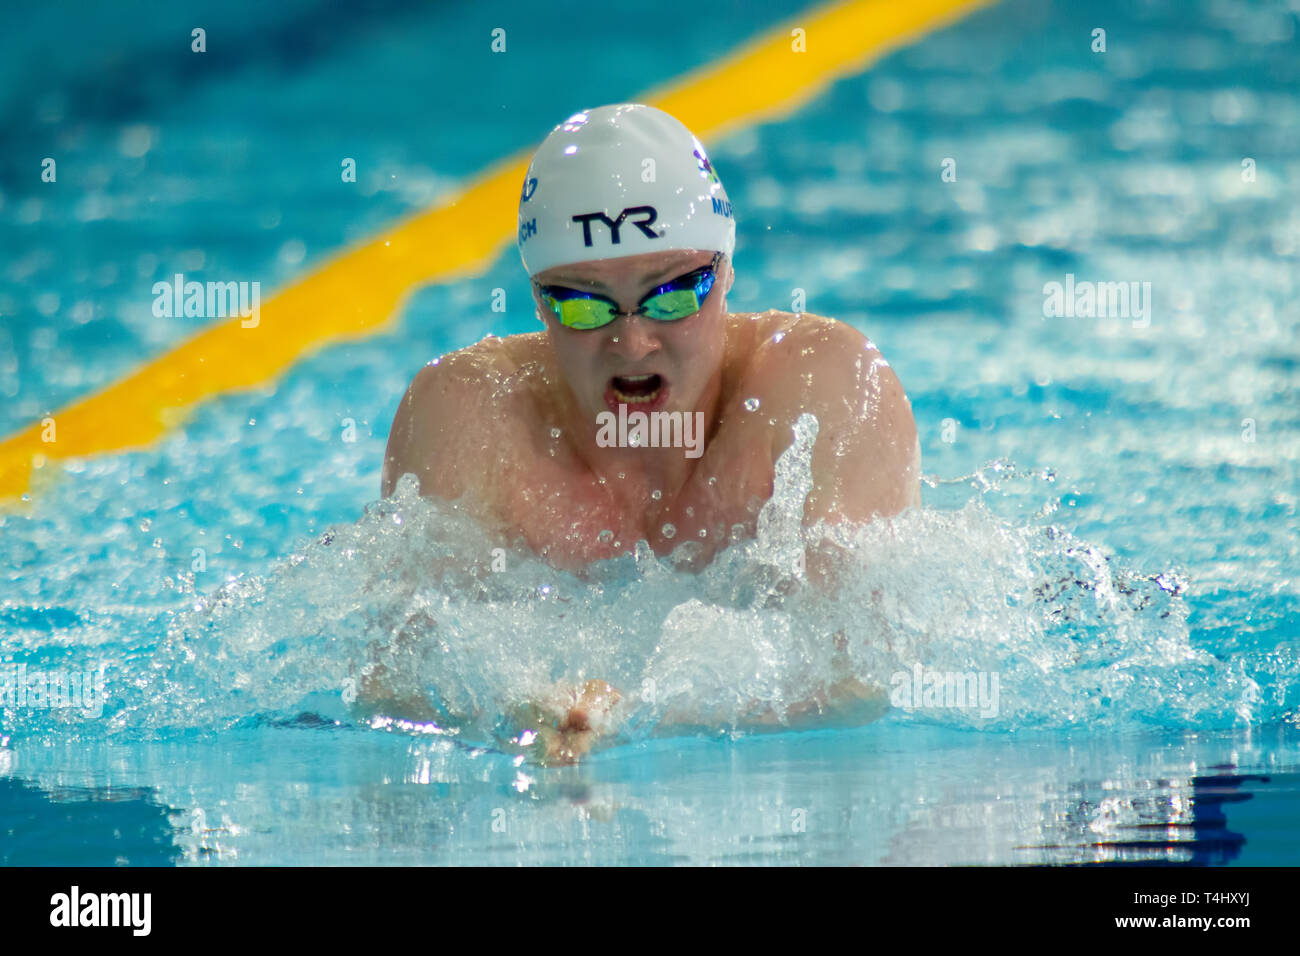 Ross Murdoch (University of Stirling) in action during the men's open 100 metres breaststroke final, during Day 1 of the 2019 British Swimming Championships, at Tollcross International Swimming Centre. Stock Photo